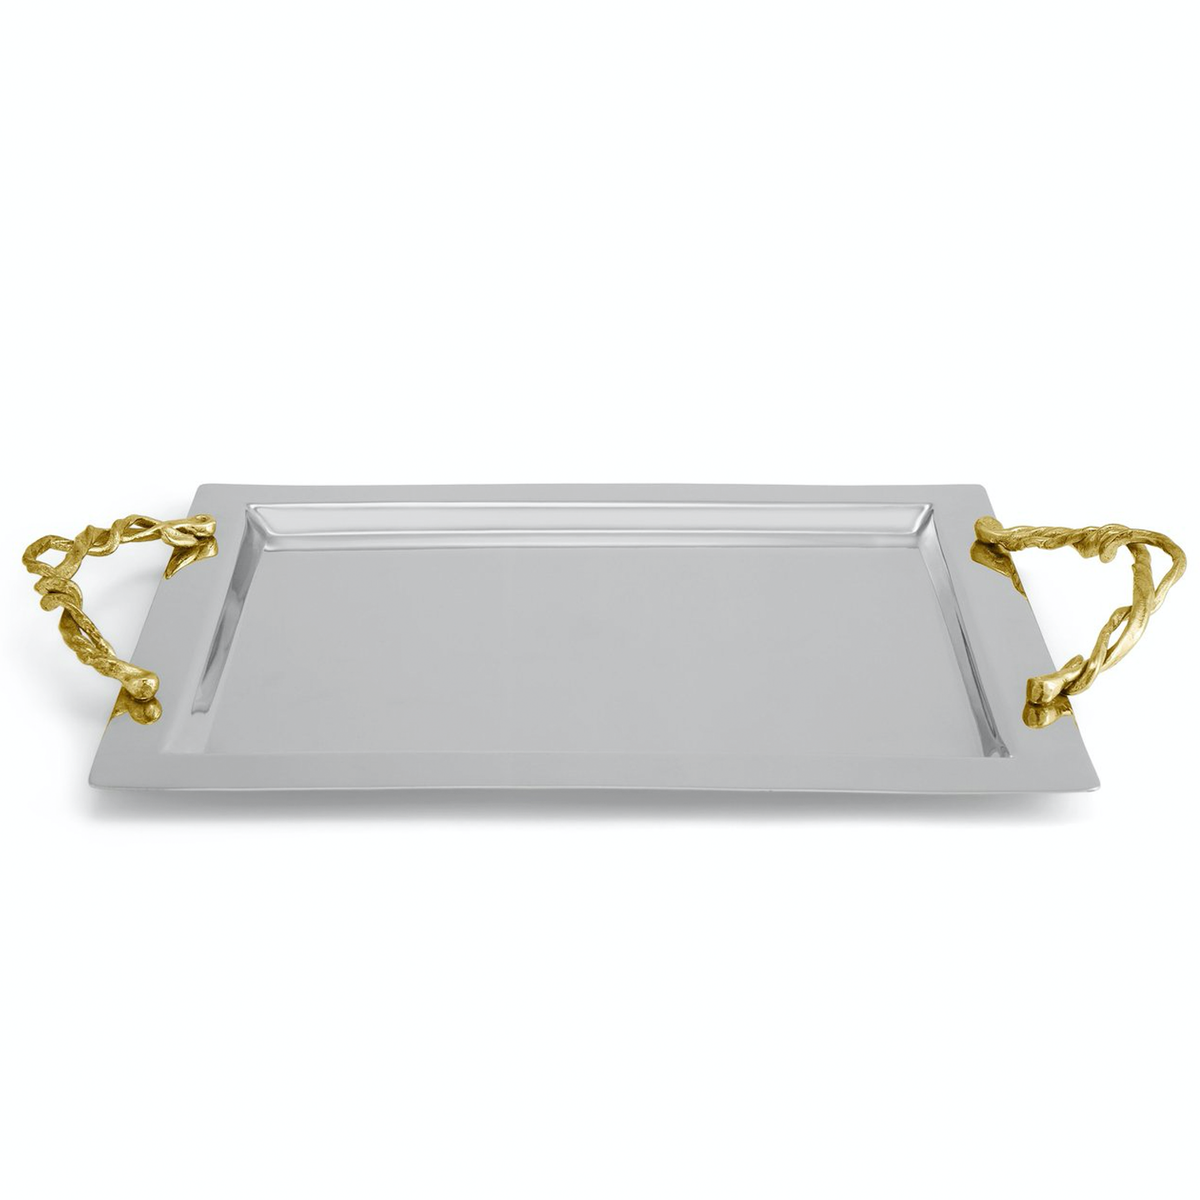 Wisteria Gold Serving Tray, Michael Aram - RSVP Style